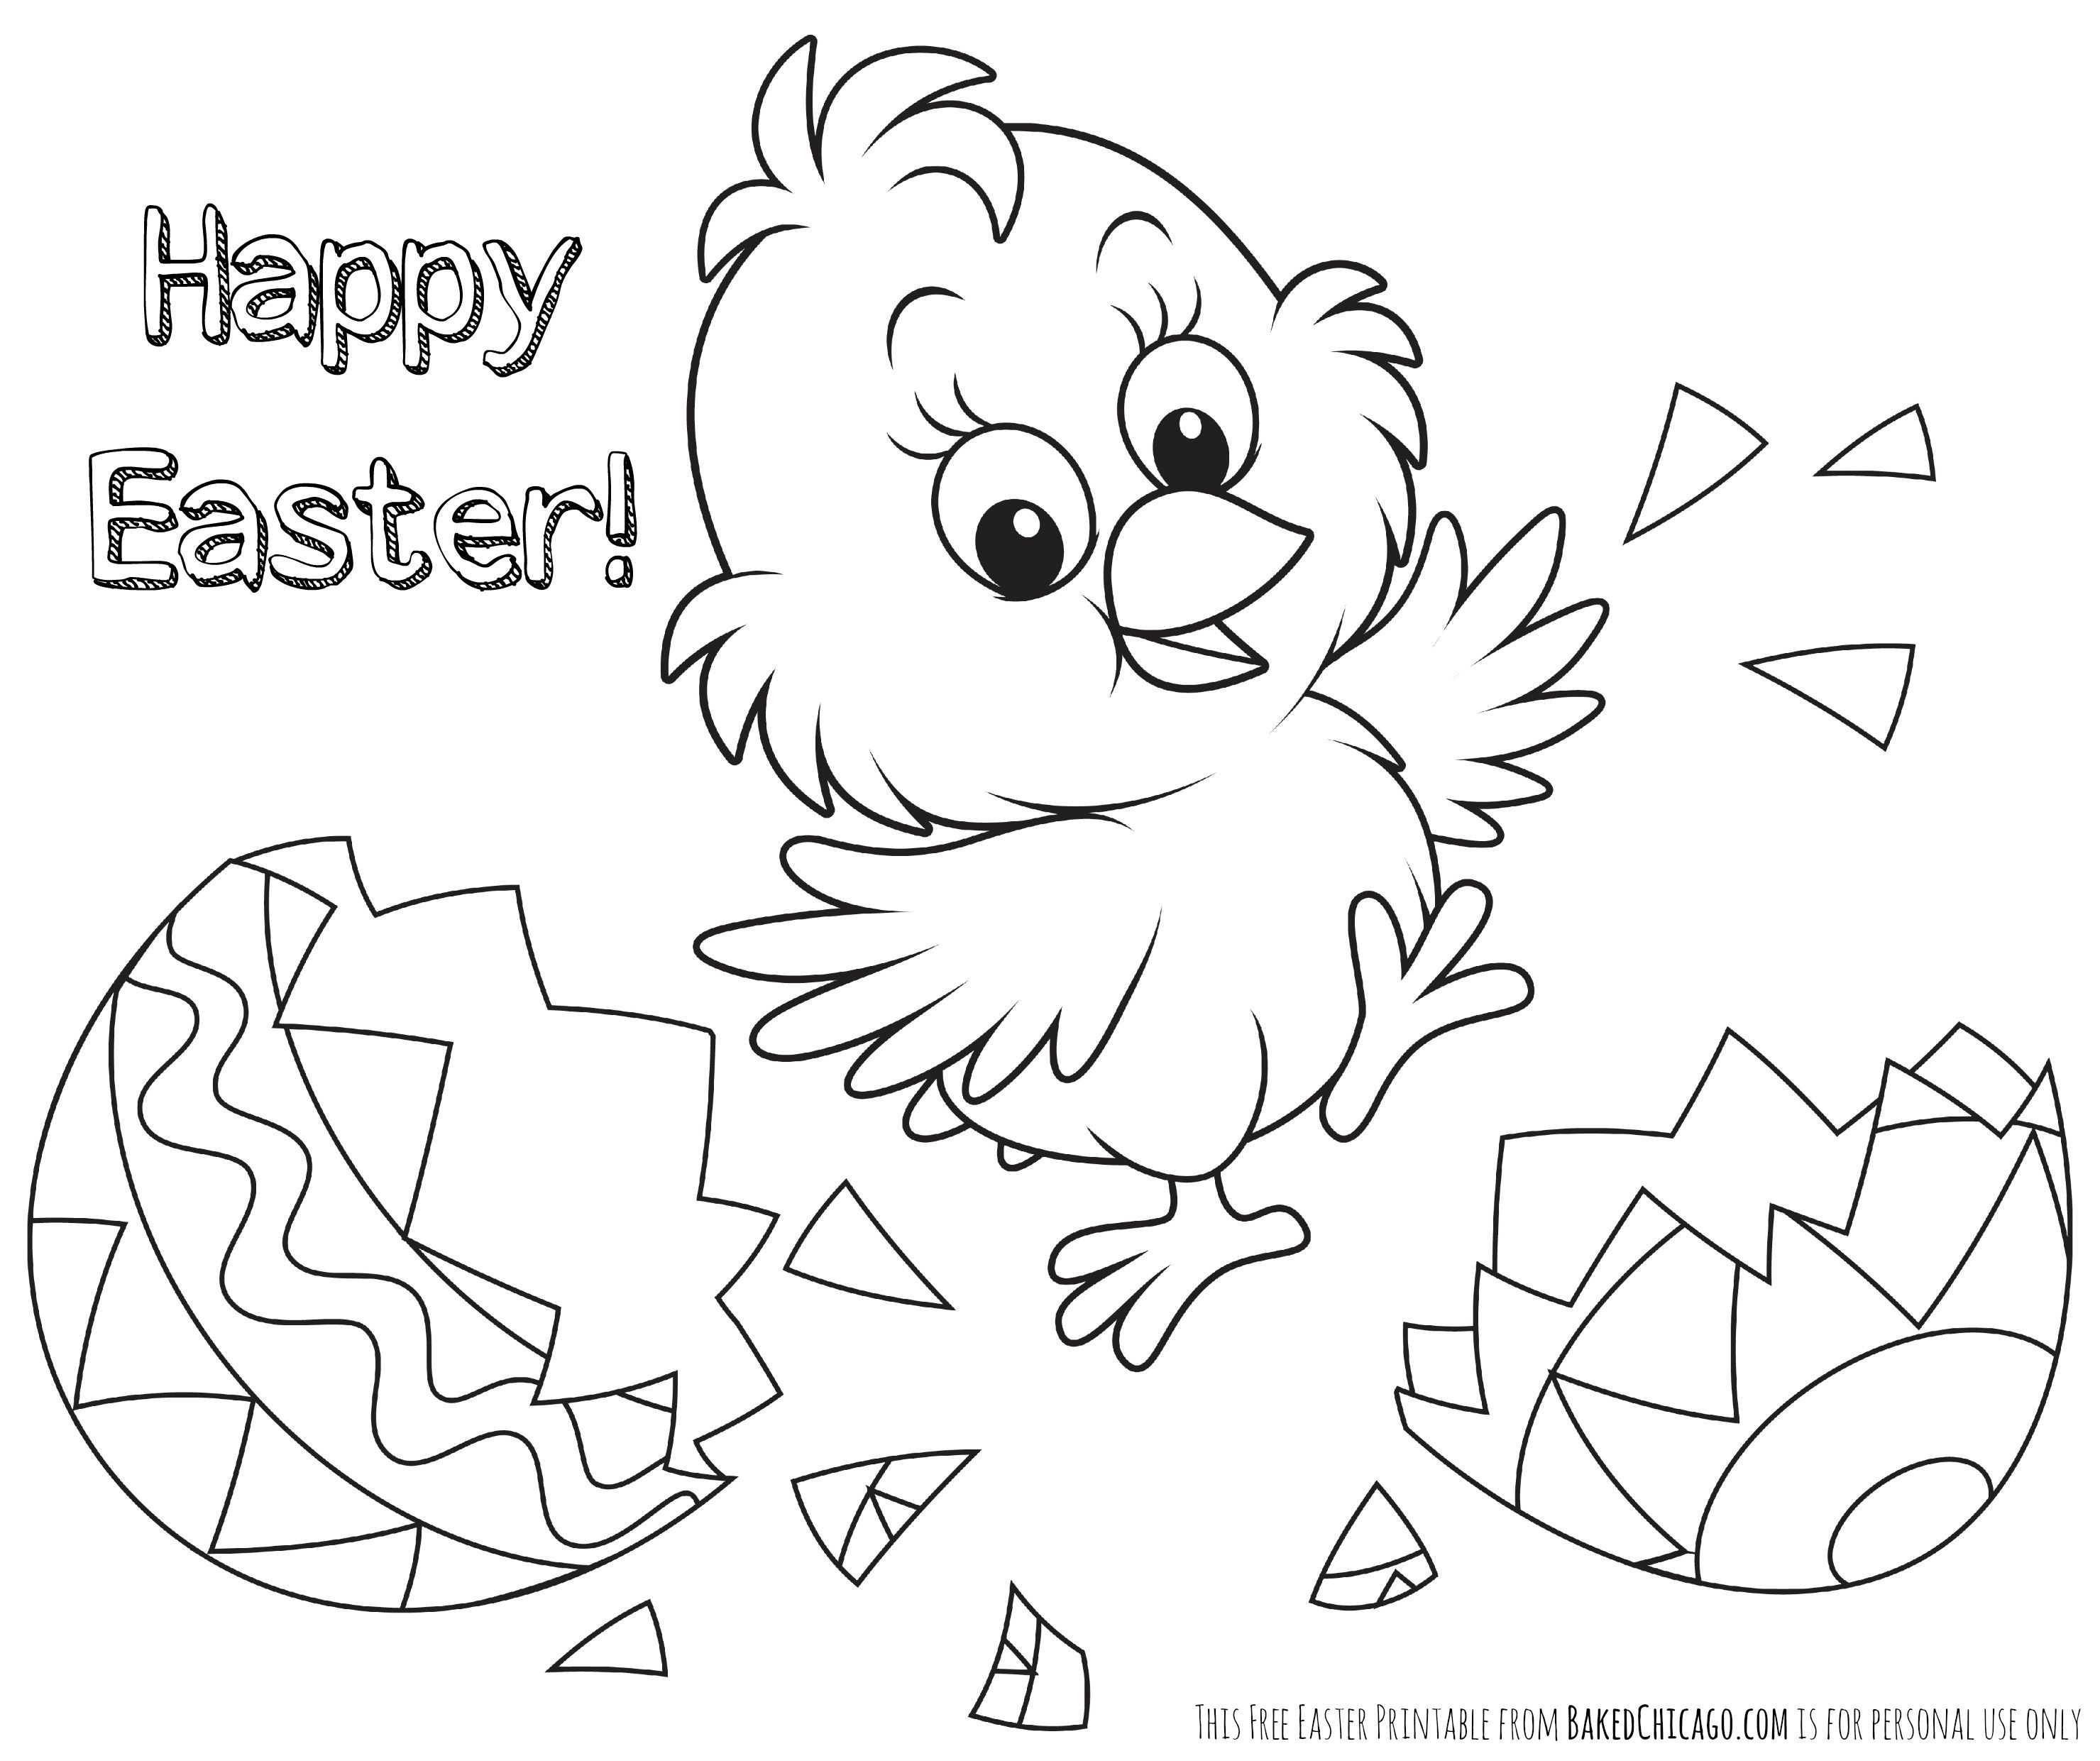 12 Free Printable Easter Coloring Pages | Topsailmultimedia - Free Printable Easter Coloring Pages